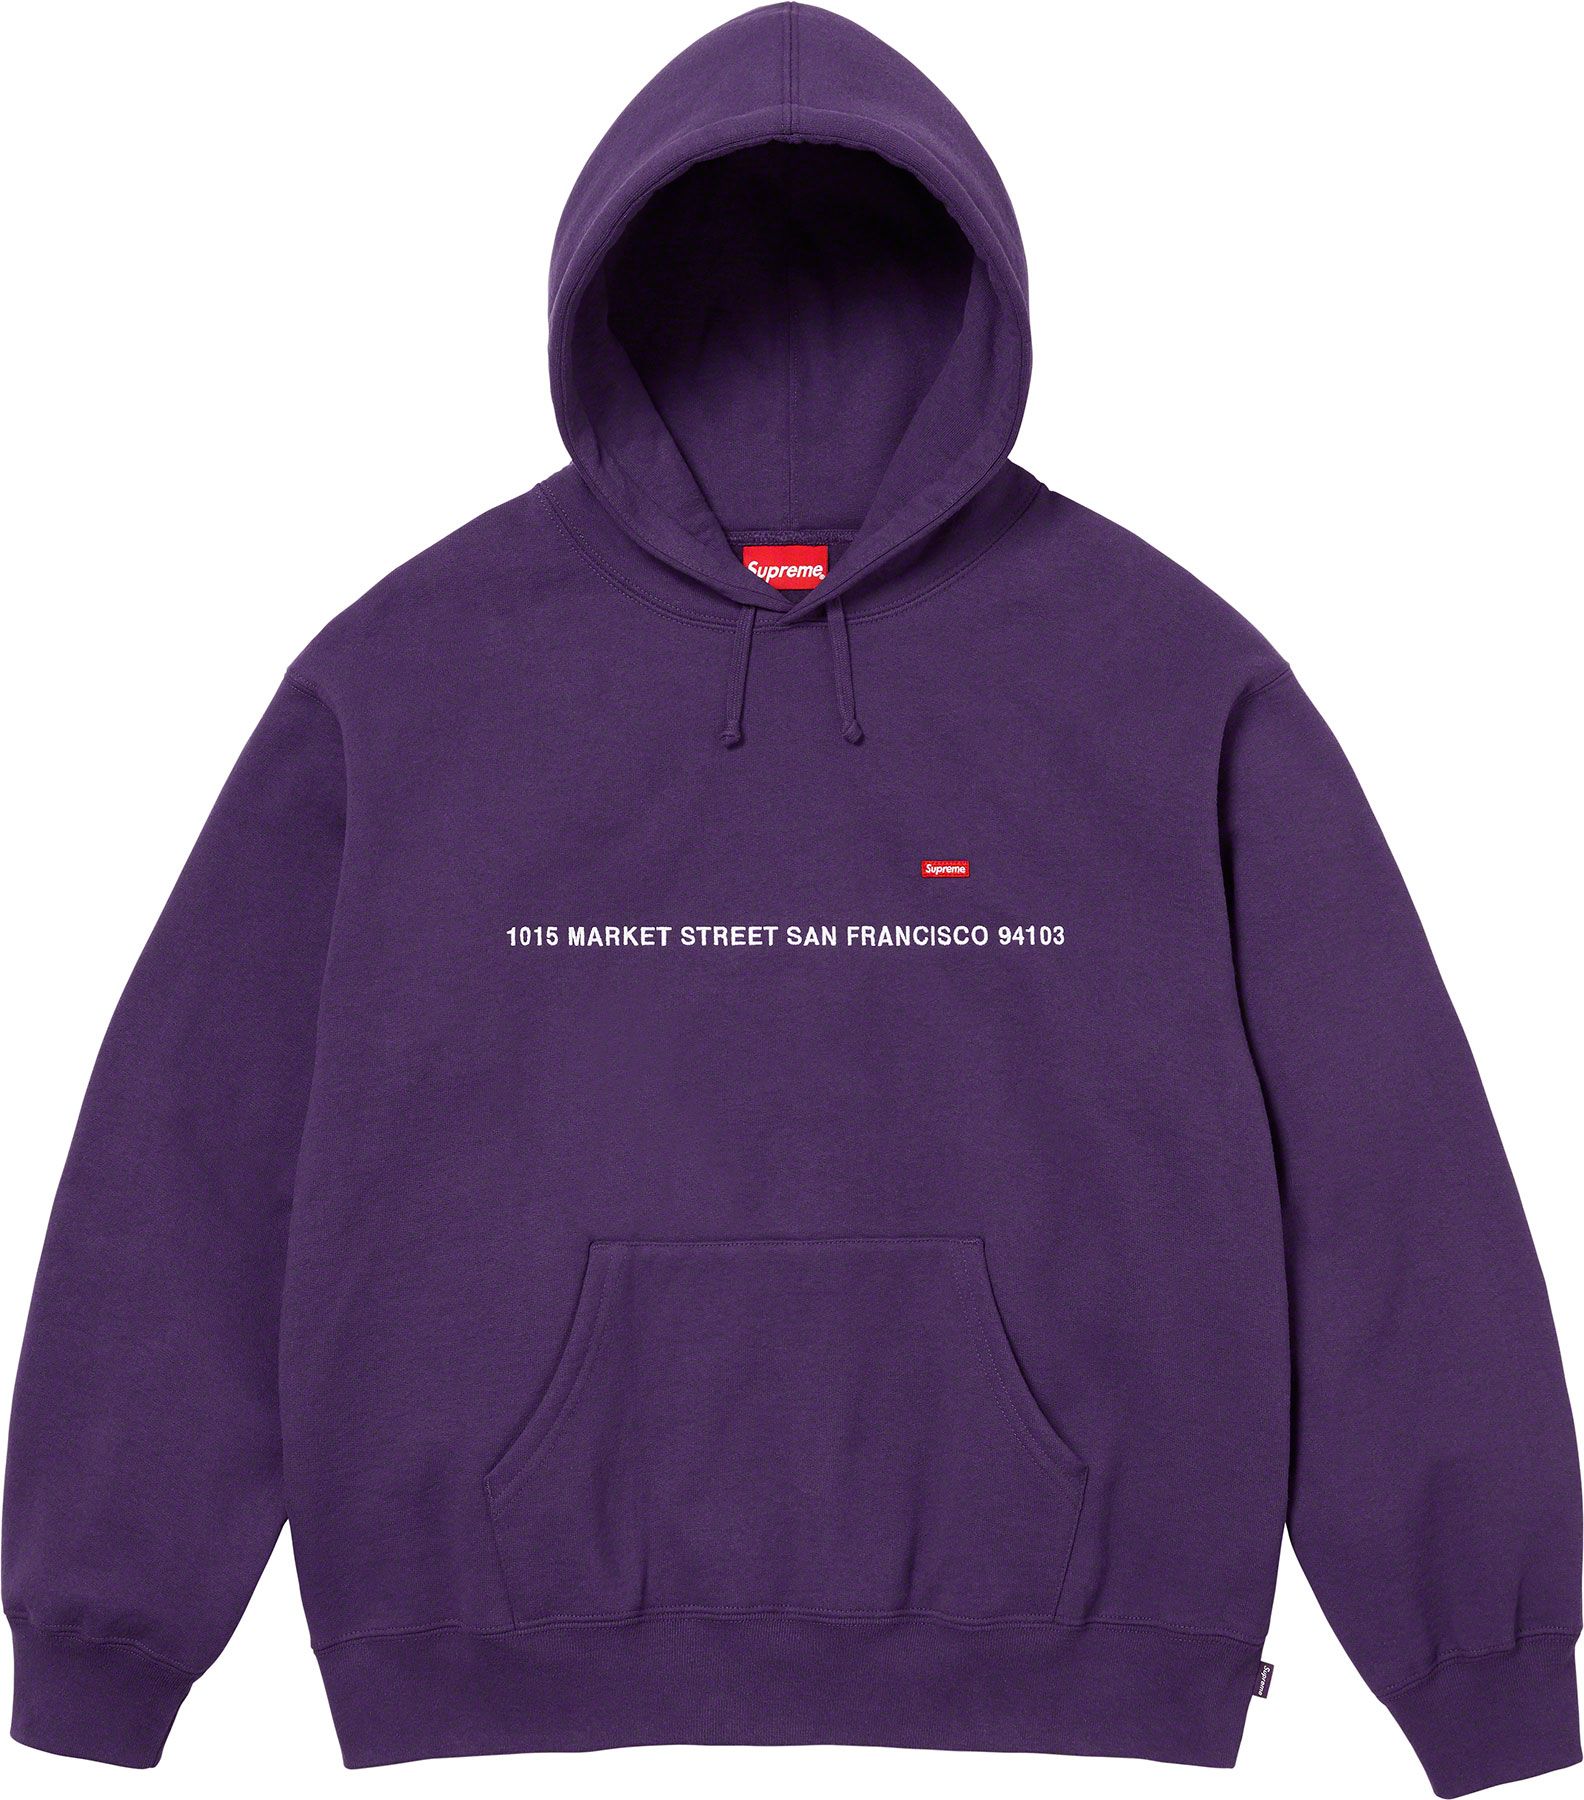 Small Box Zip Up Hooded Sweatshirt - Fall/Winter 2023 Preview ...